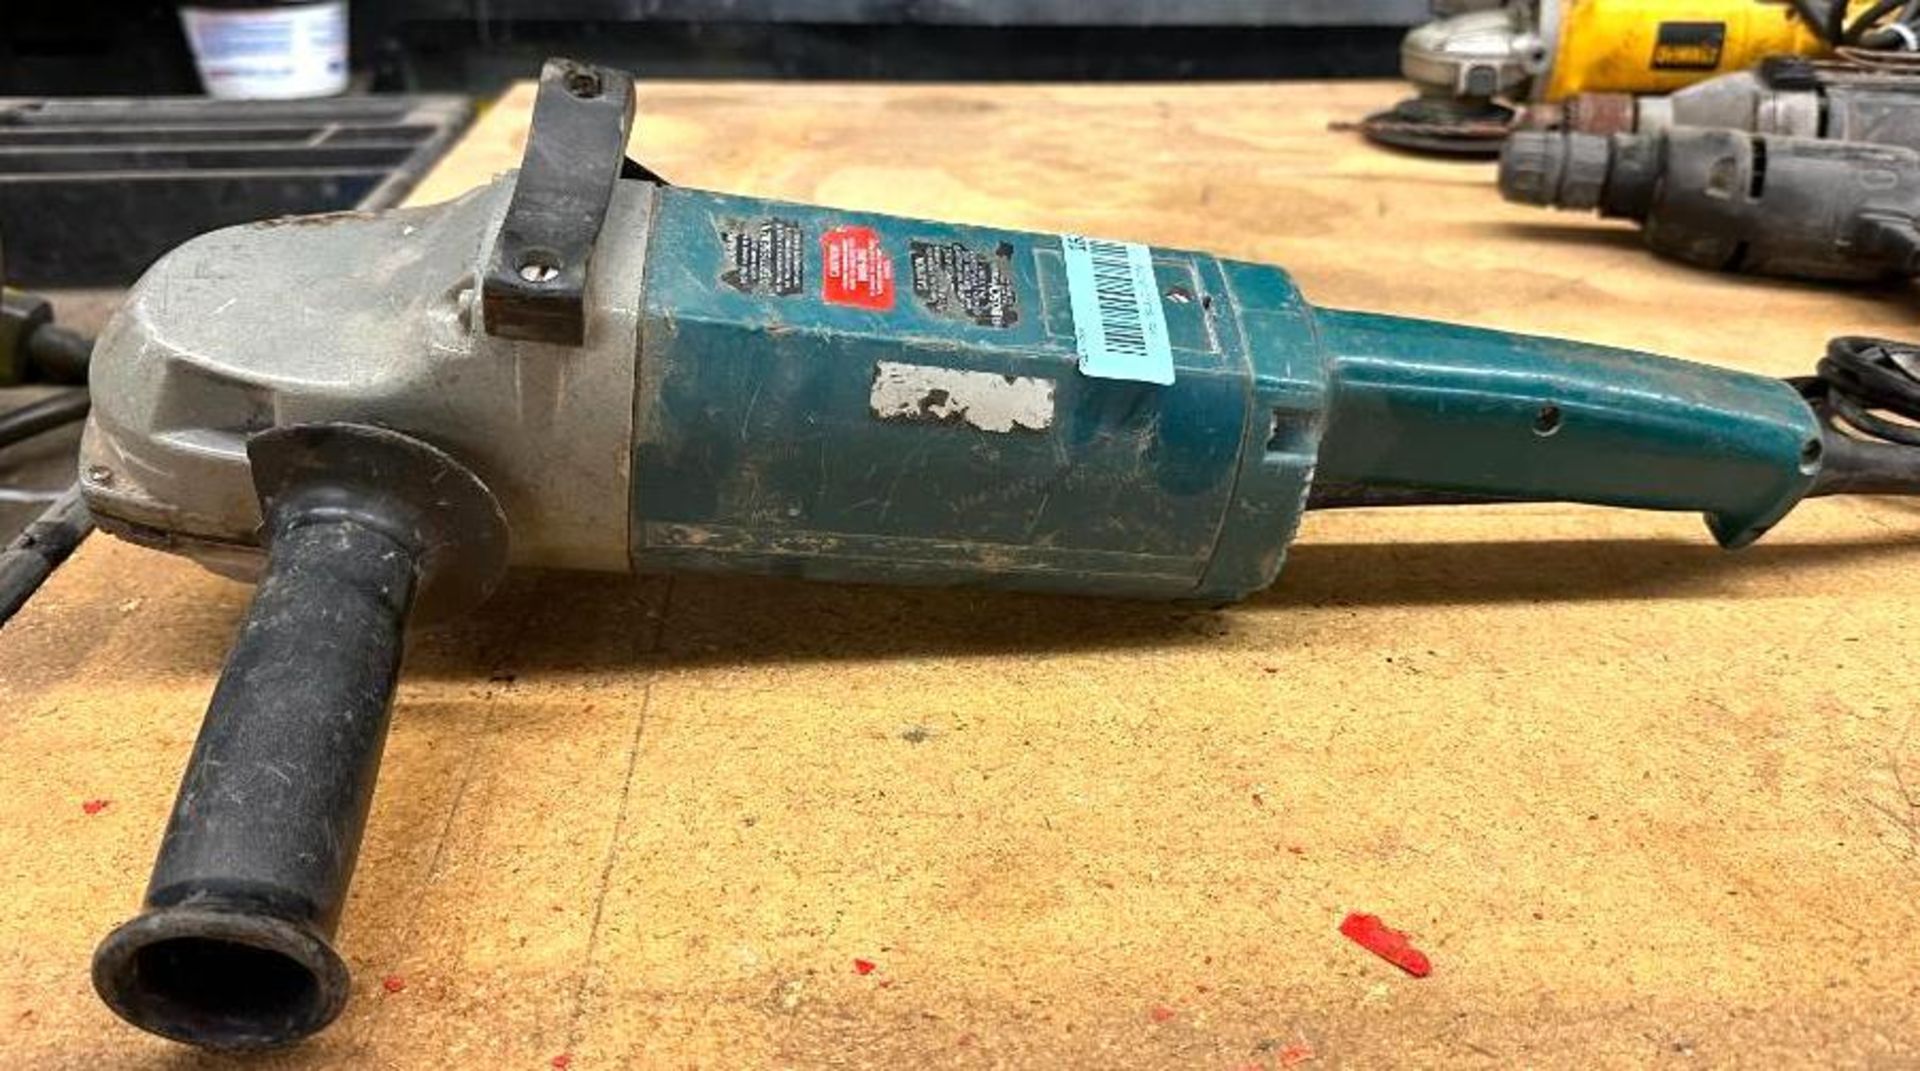 7" ELECTRIC ANGLE GRINDER